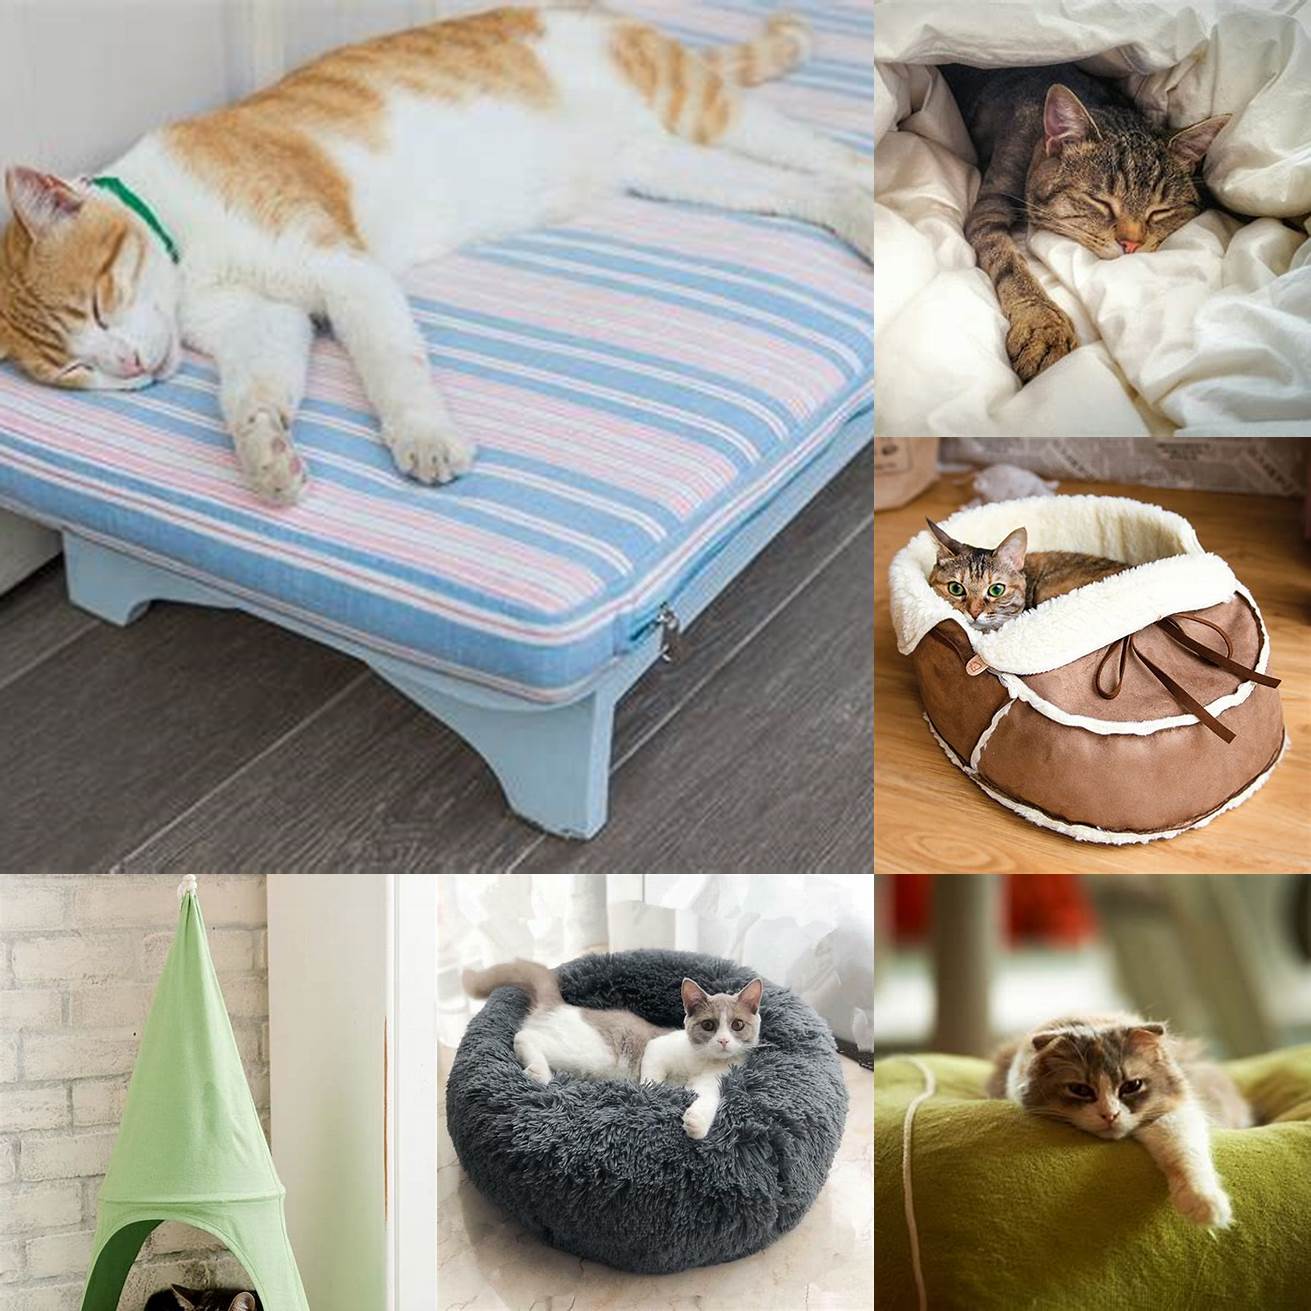 Image Idea 1 A cat resting comfortably in a cozy bed